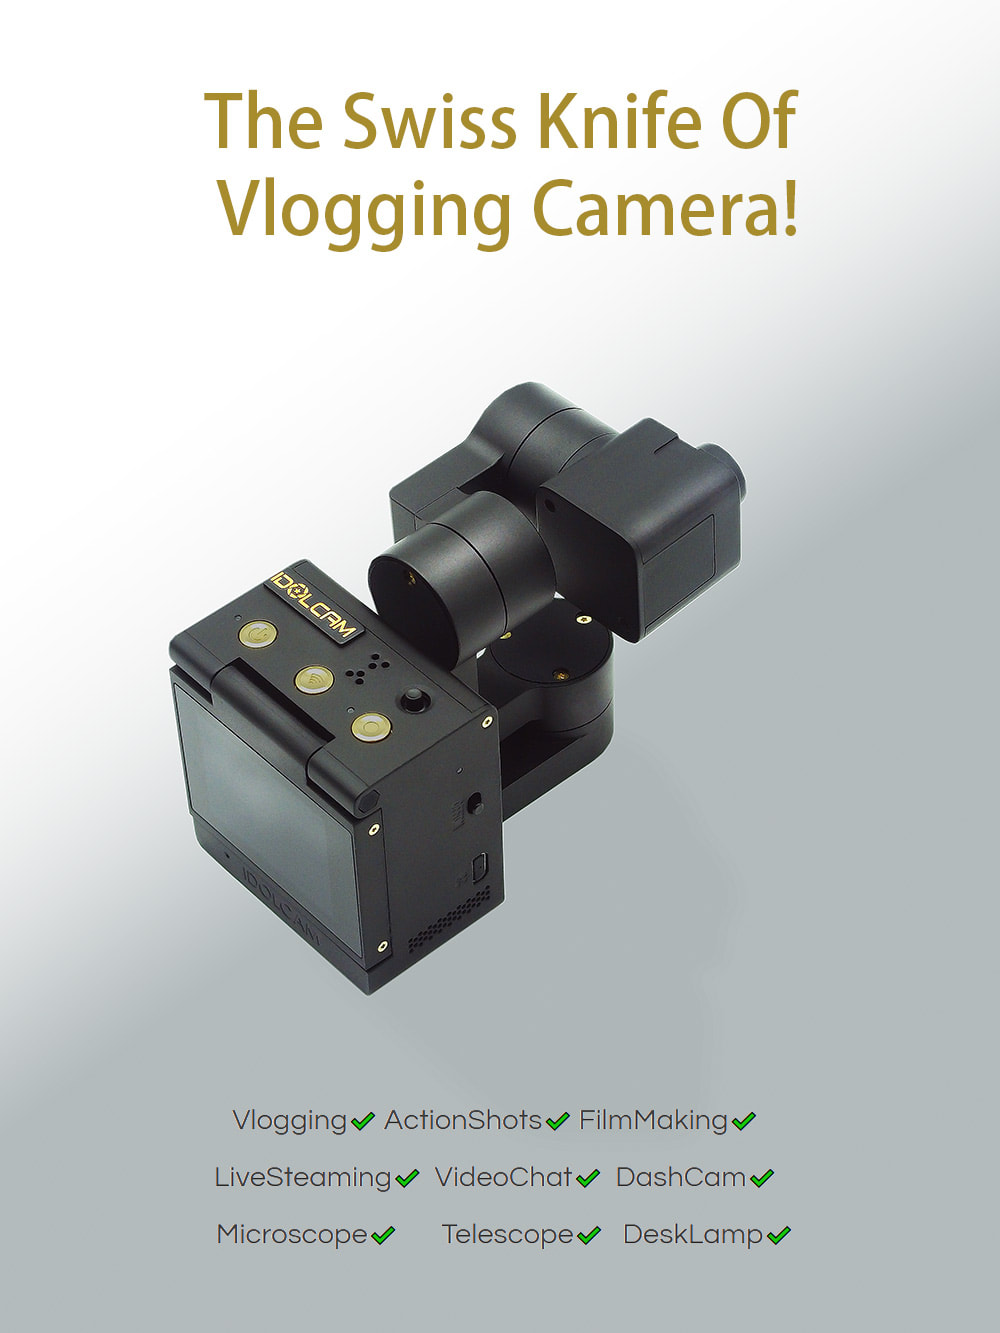 Idolcam is the swiss knife of vlogging camera, IDOLCAM is the world's most versatile vlogging camera for YouTube. Idolcam is the only 4K vlogging camera to feature lighting, 3 axis gimbal, interchangeable lenses, flip screen, into one tiny device